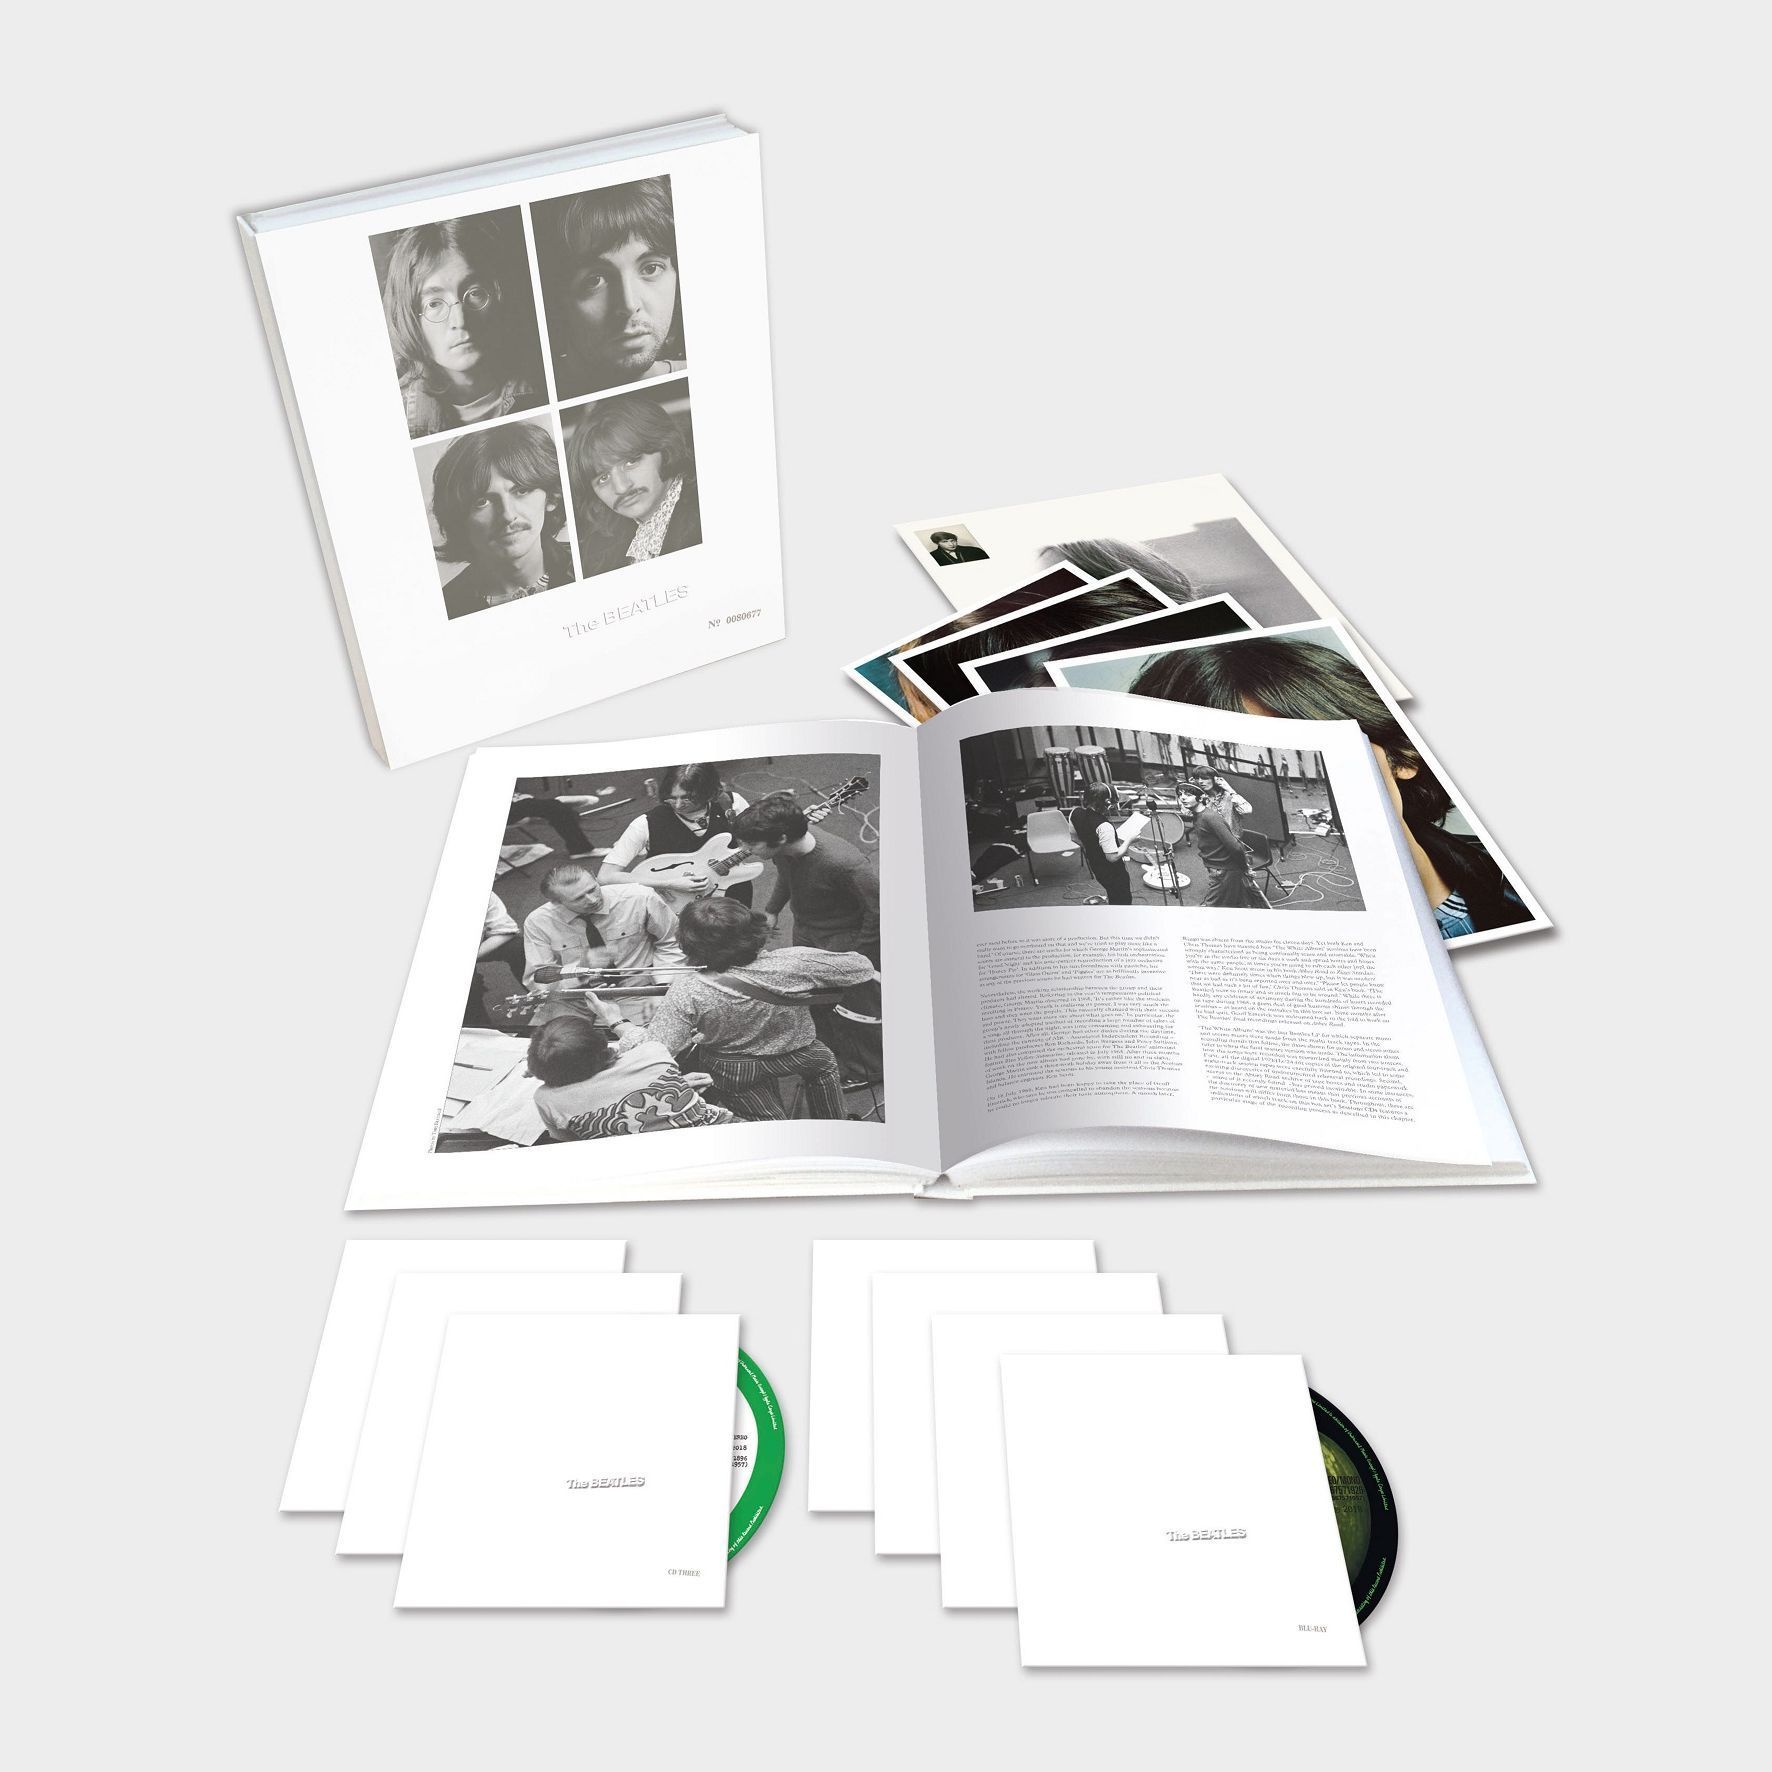 THE BEATLES (WHITE ALBUM) [SUPER DELUXE EDITION 6CD+1BLU-RAY